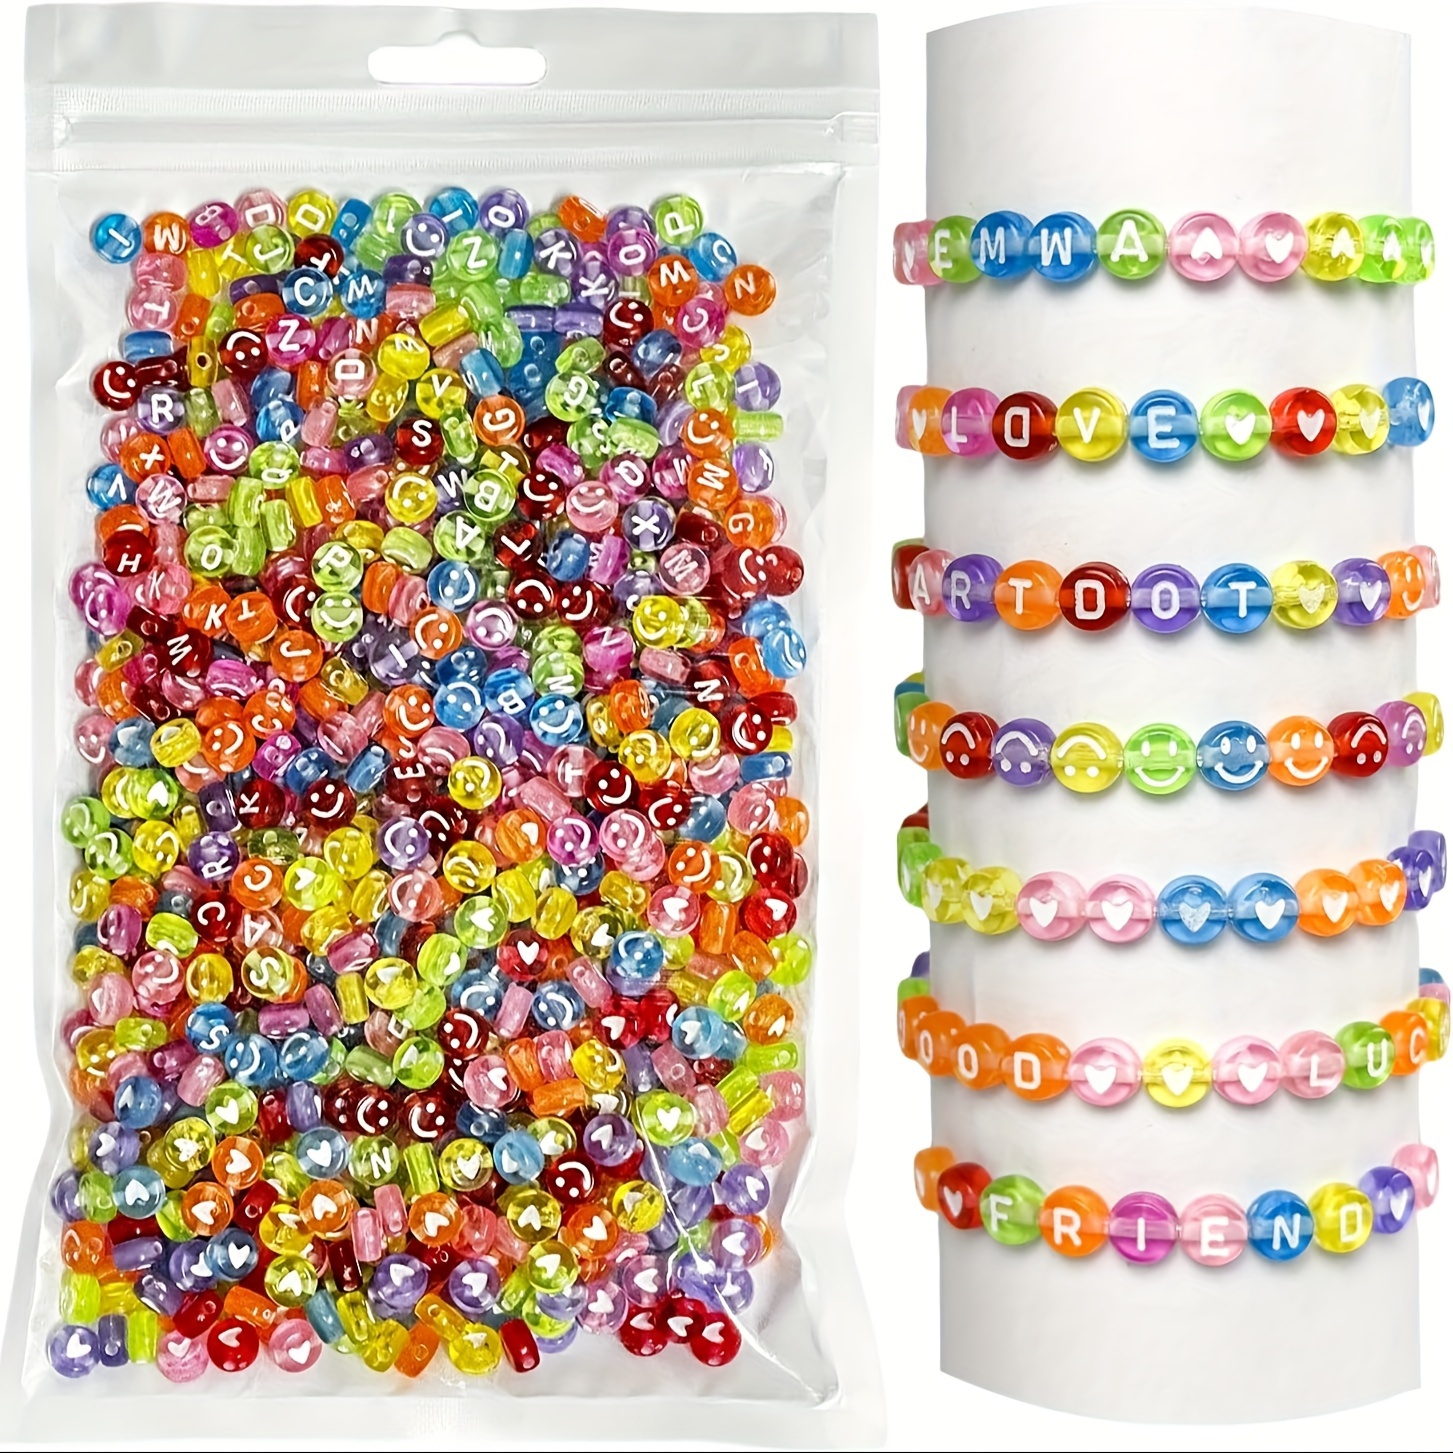 

1000pcs 28 Styles Colorful Letter Beads Smiling Face Beads For Jewelry Making Diy Friendship Fashion Bracelet Necklace Handicrafts Small Business Supplies